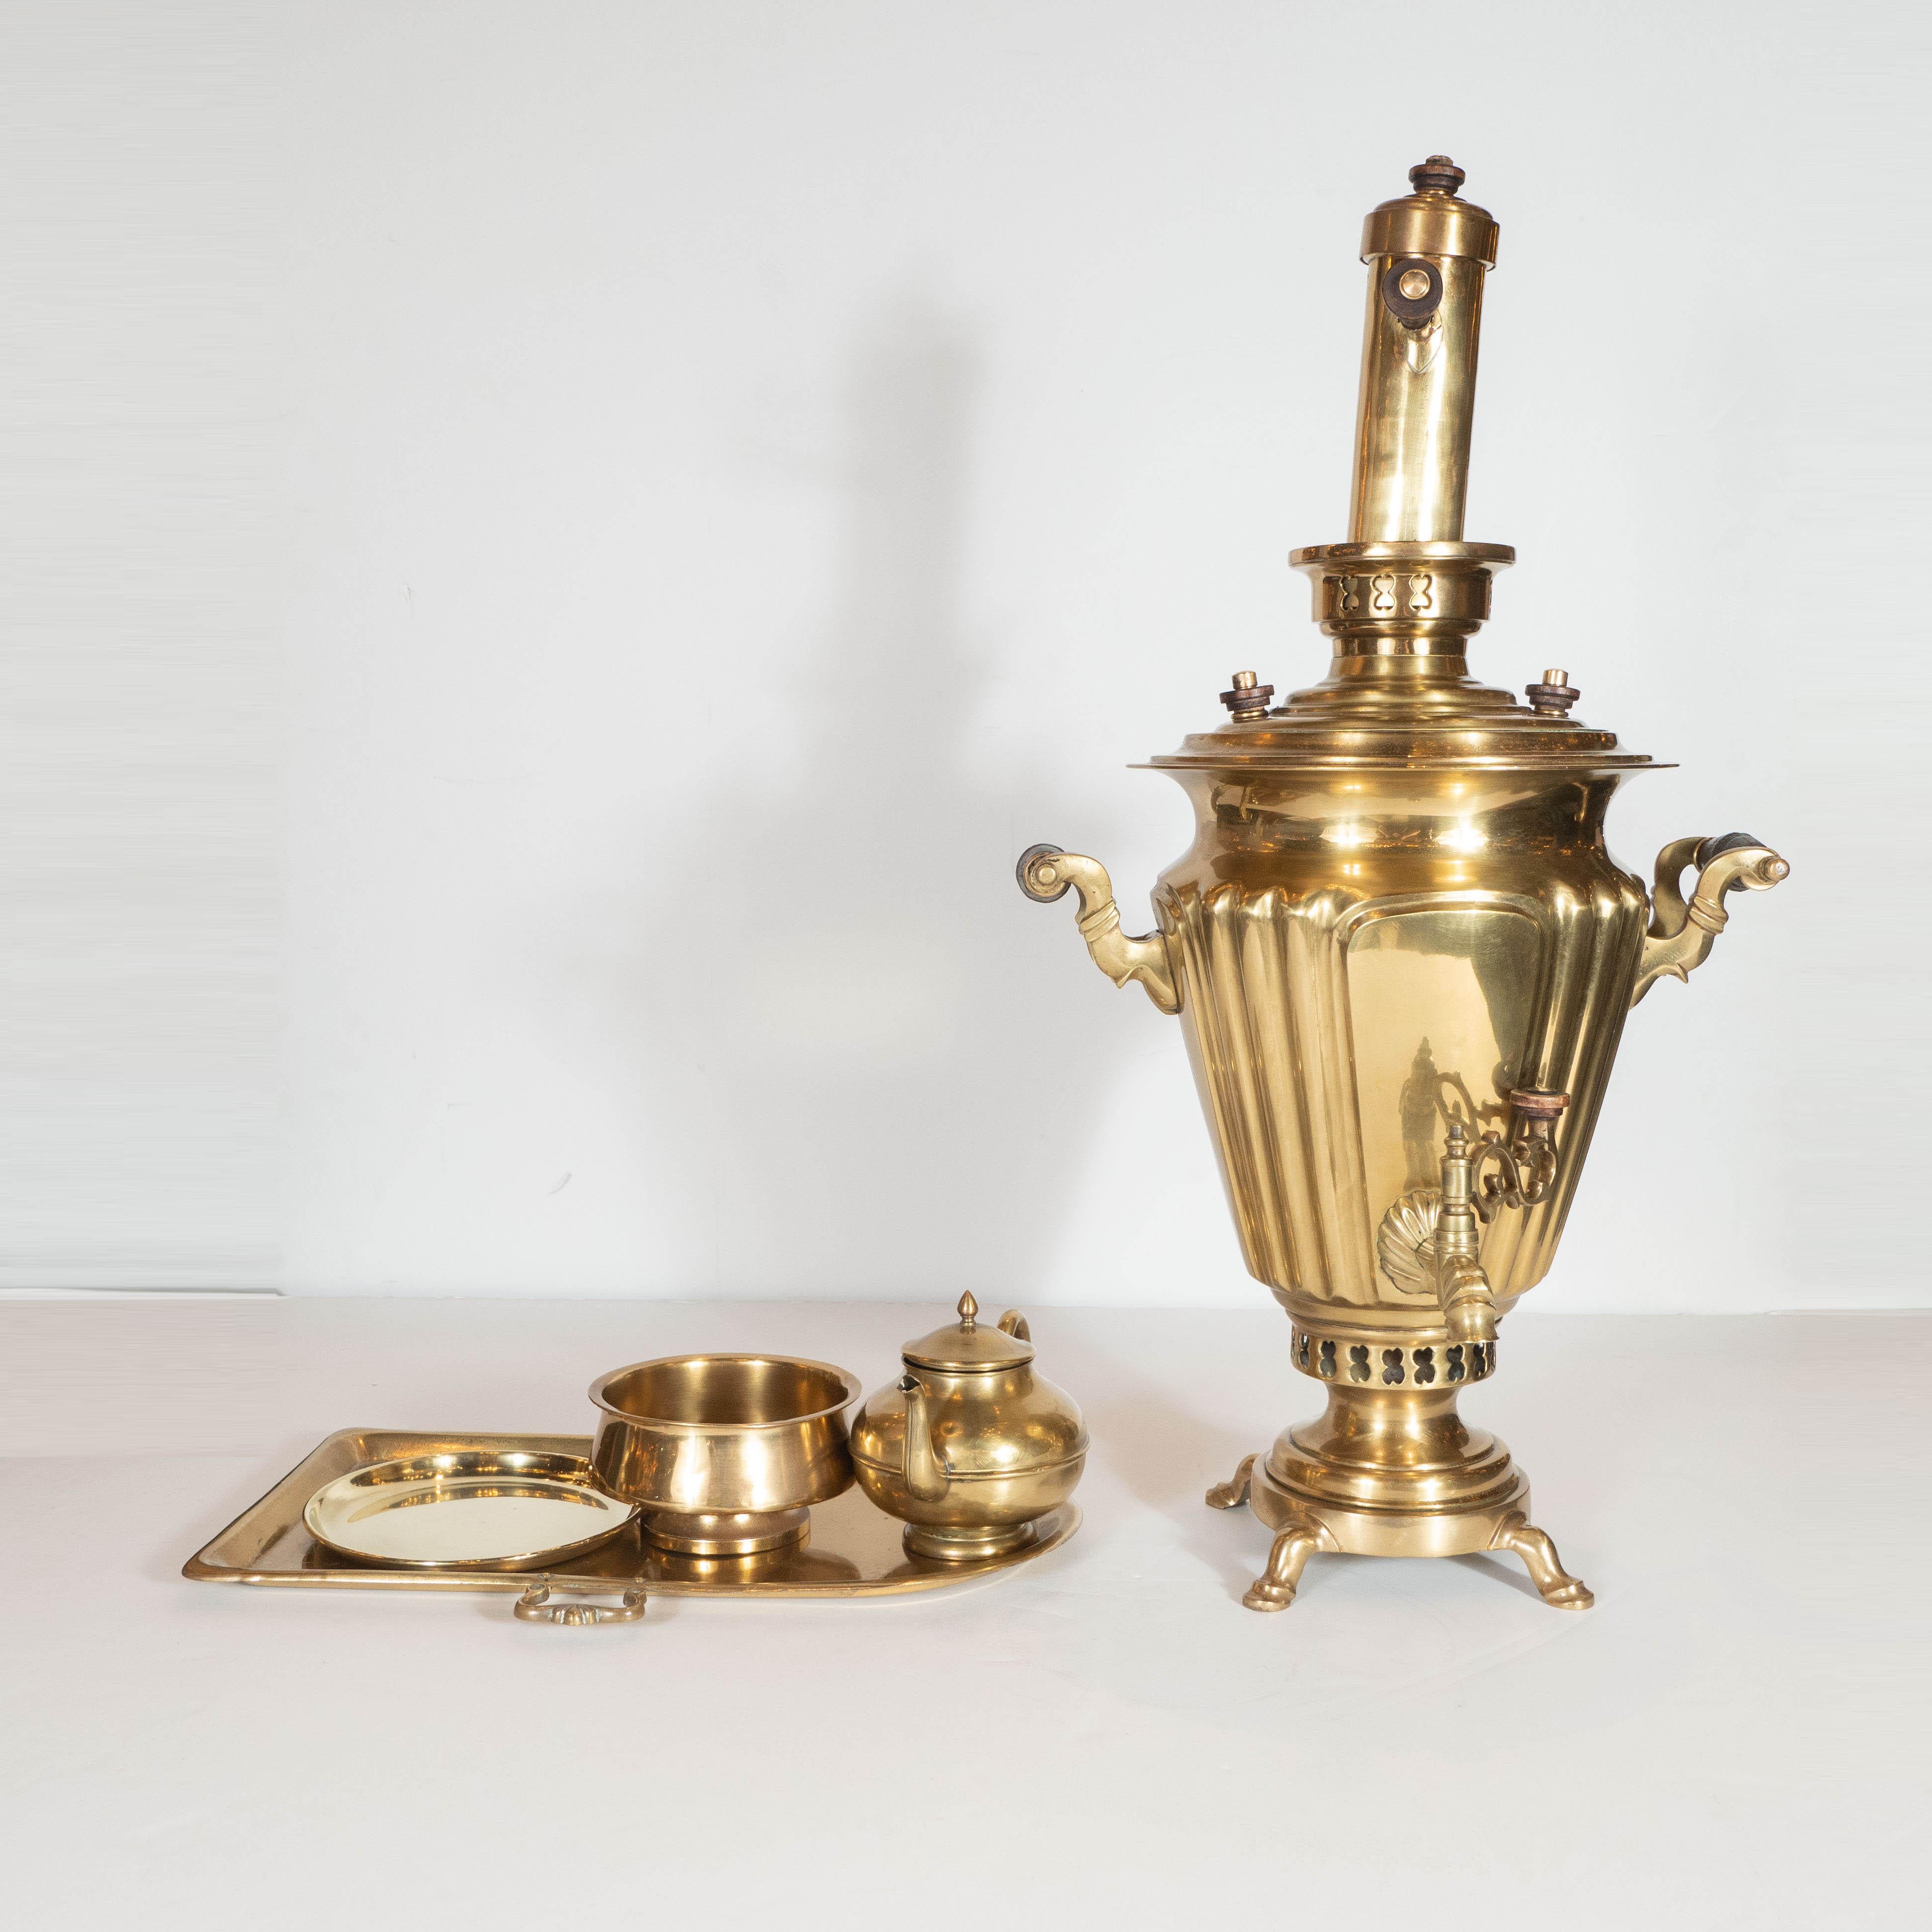 This elegant and baronial six piece brass Samovar was realized in Moscow, Russia by the esteemed maker Alenchikov & Zimin, circa 1872. It features a classical vase shaped body; a tea pot and tea tray; a chimney; a drip pot; and a bullet form serving